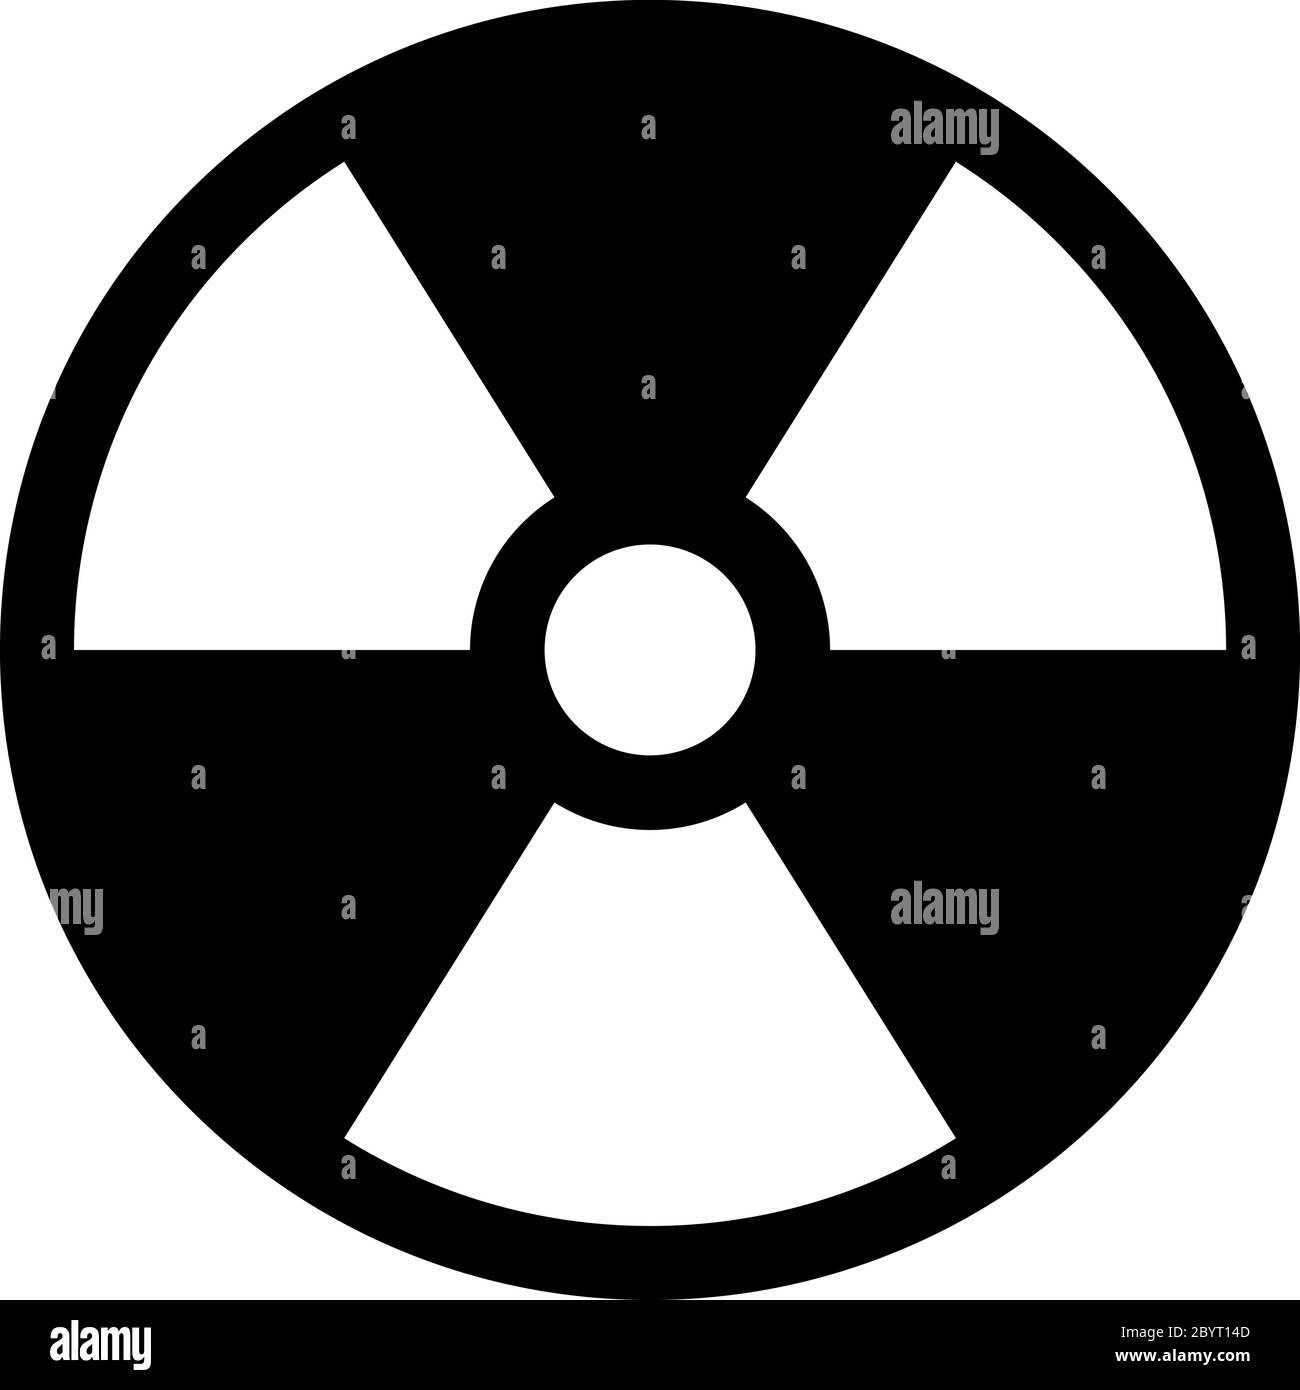 Radioactive material sign. Symbol of radiation alert, hazard or risk. Simple flat vector illustration in black and white. Stock Vector